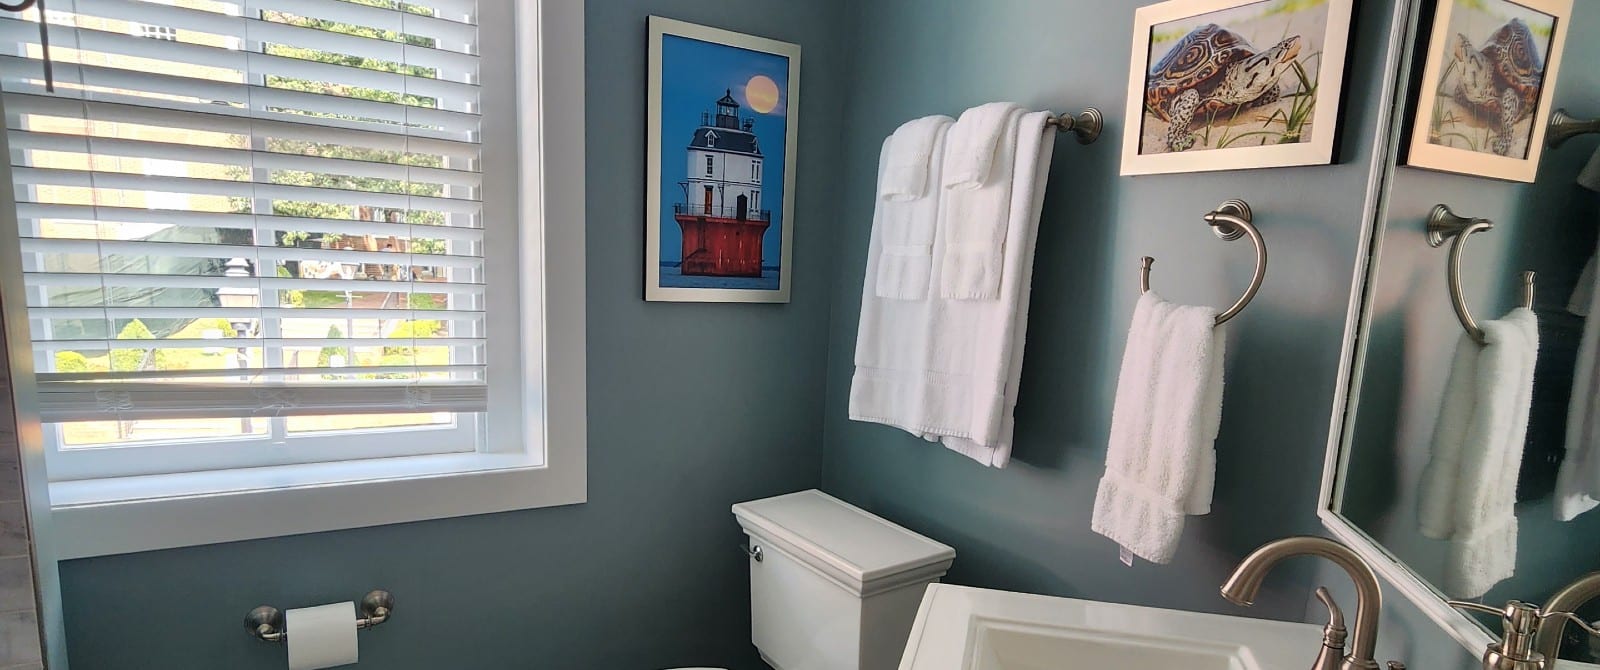 Bathroom with pedestal sink, mirror, white towels, colorful artwork and window with blinds